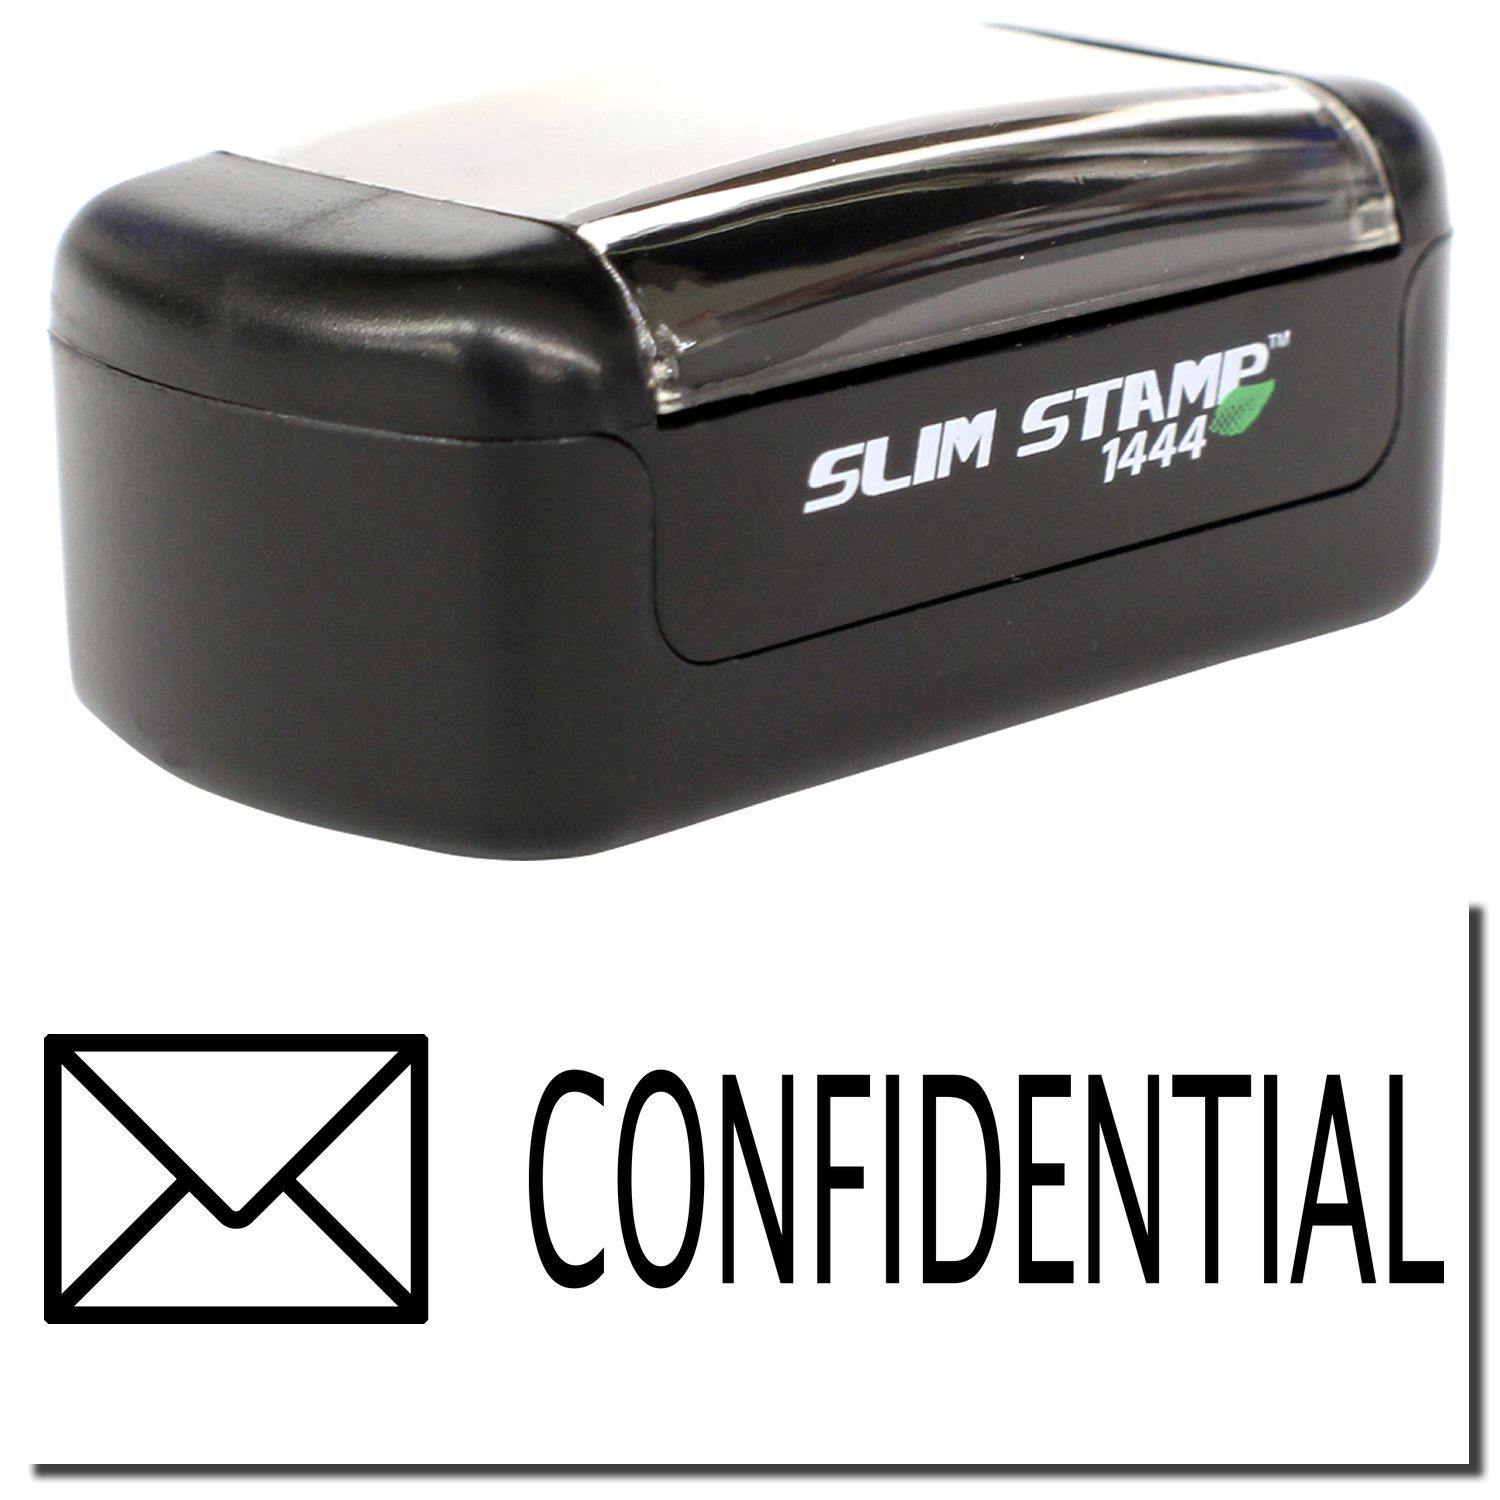 A stock office pre-inked stamp with a stamped image showing how the text "CONFIDENTIAL" with an envelope image on the left side is displayed after stamping.